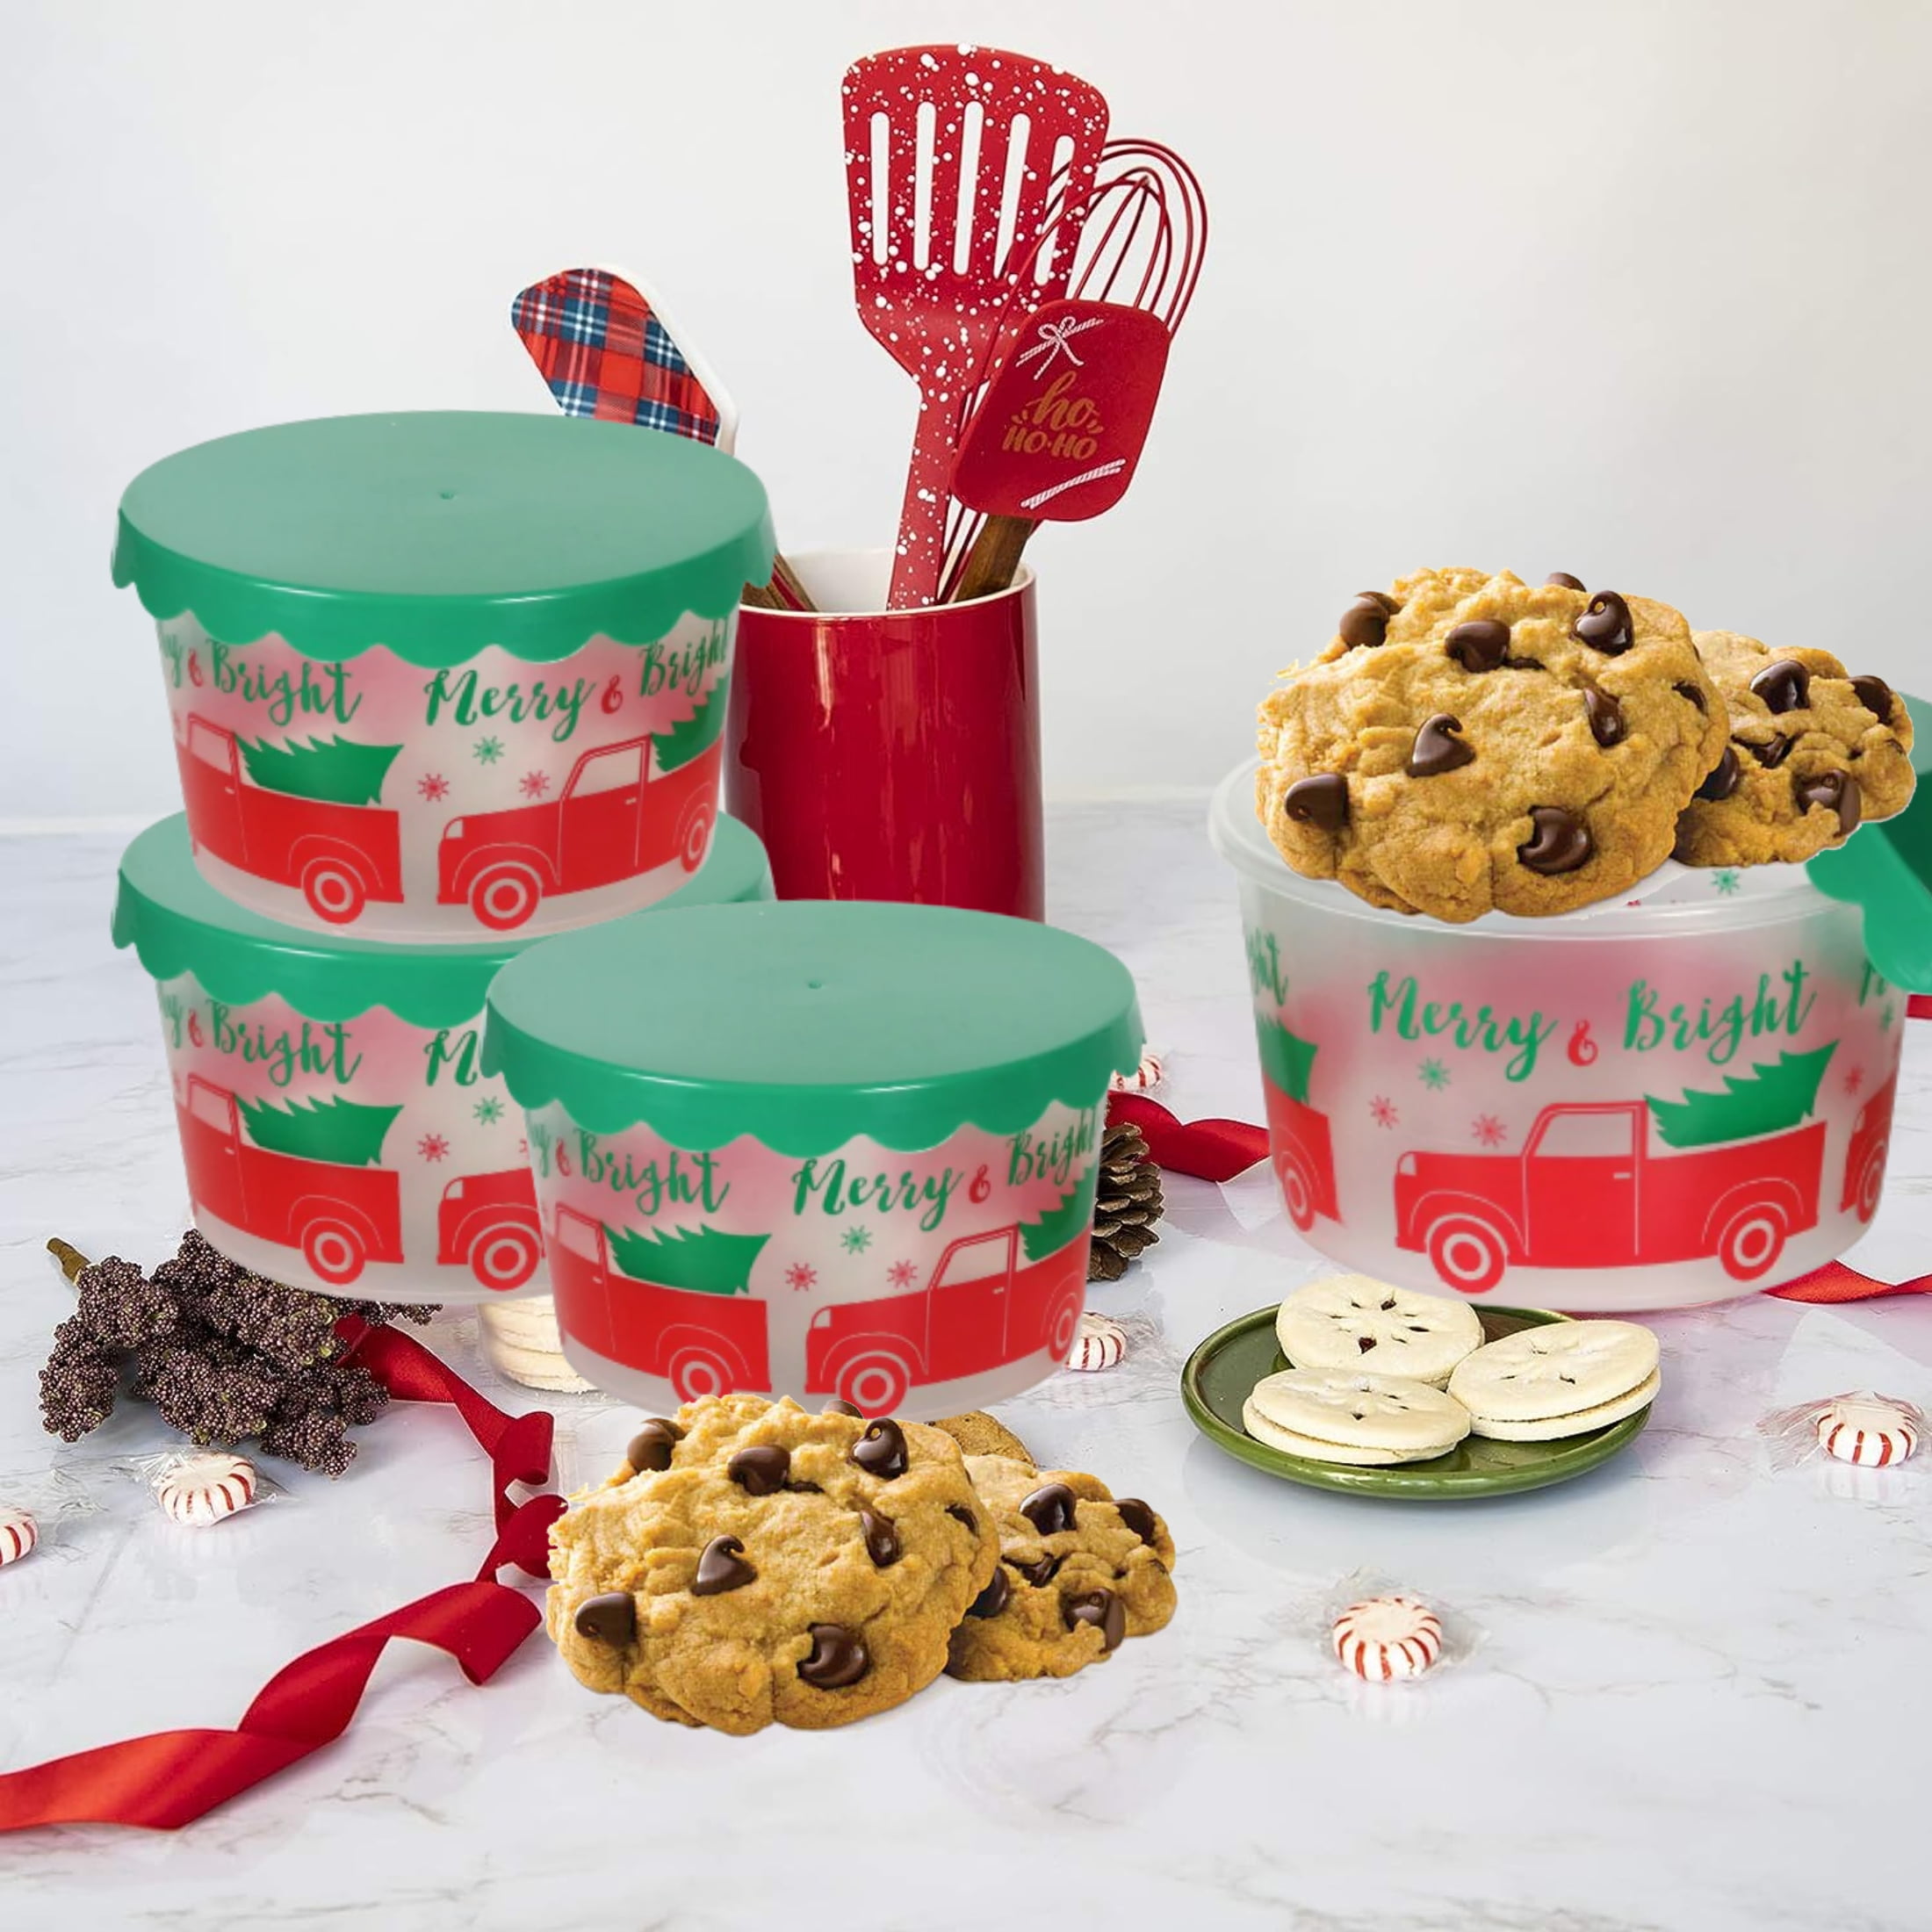 Christmas Containers for Holiday Cookies Candy and Treats with Lids-Light  weight and Stackable Bundle of 2 Plastic Jars